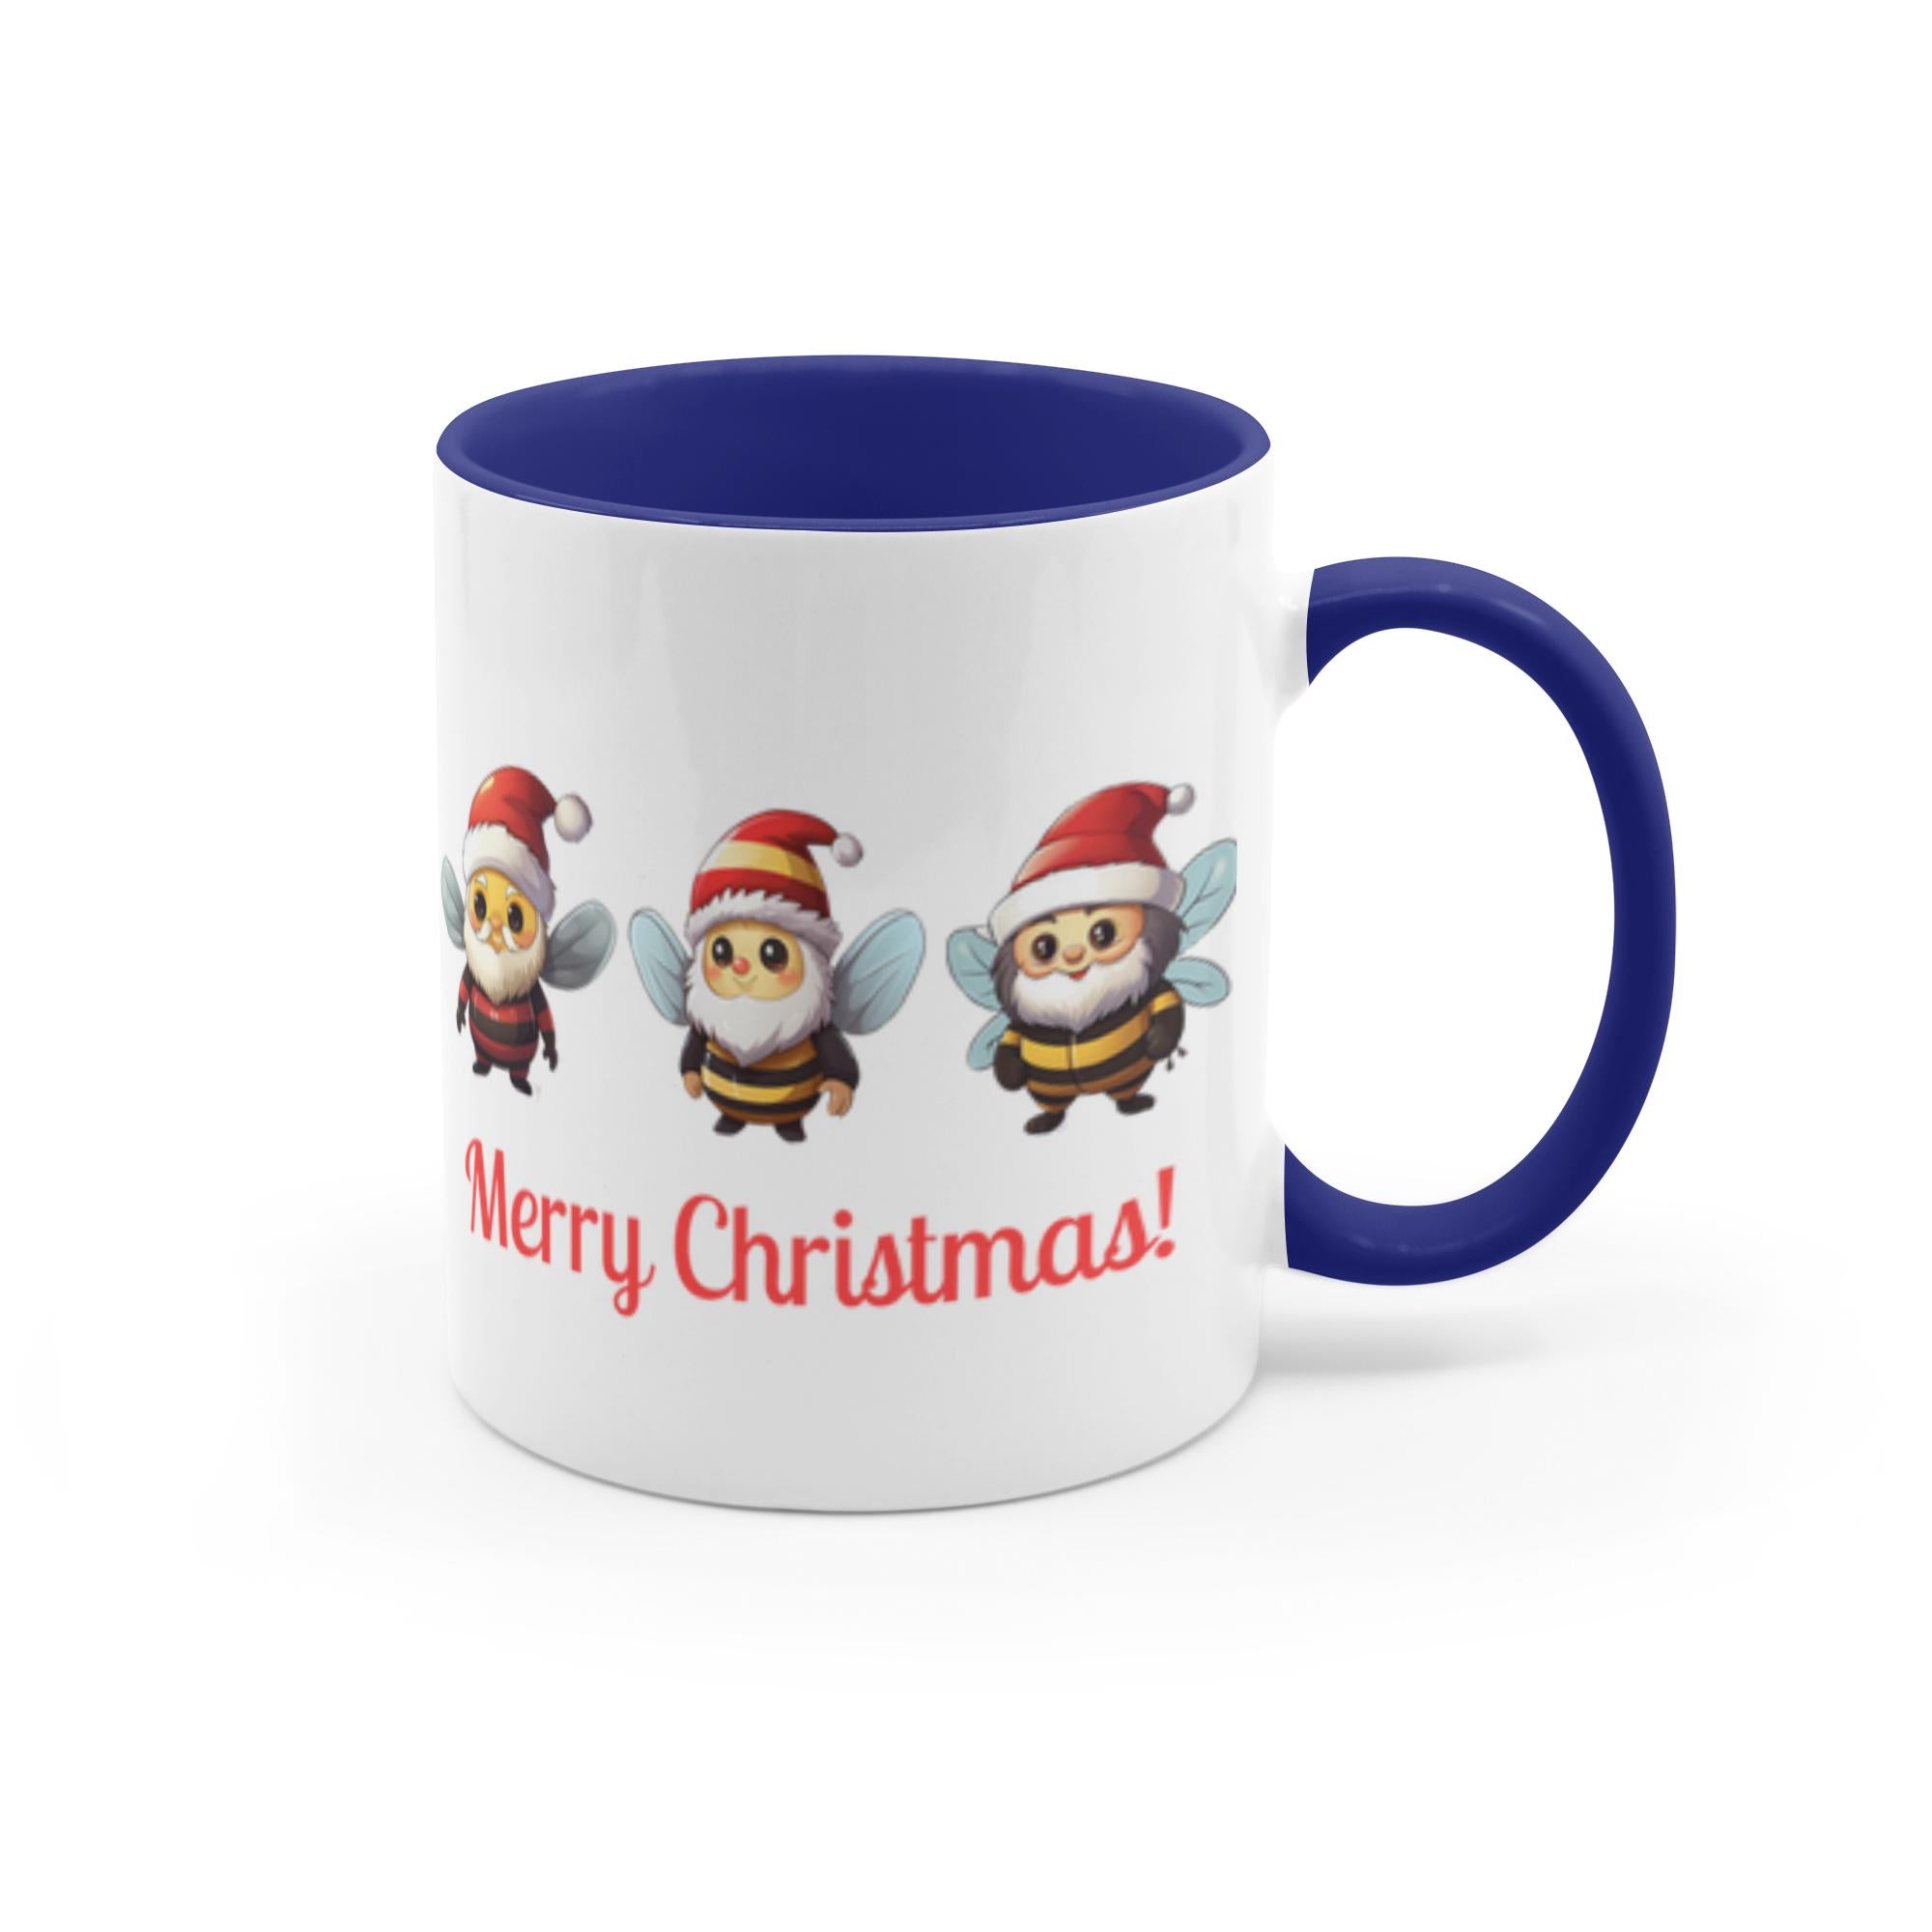 Merry Christmas 11 oz. Accent Mug 11 oz White With Dark Blue Accents Coffee & Tea Cups gifts holiday store